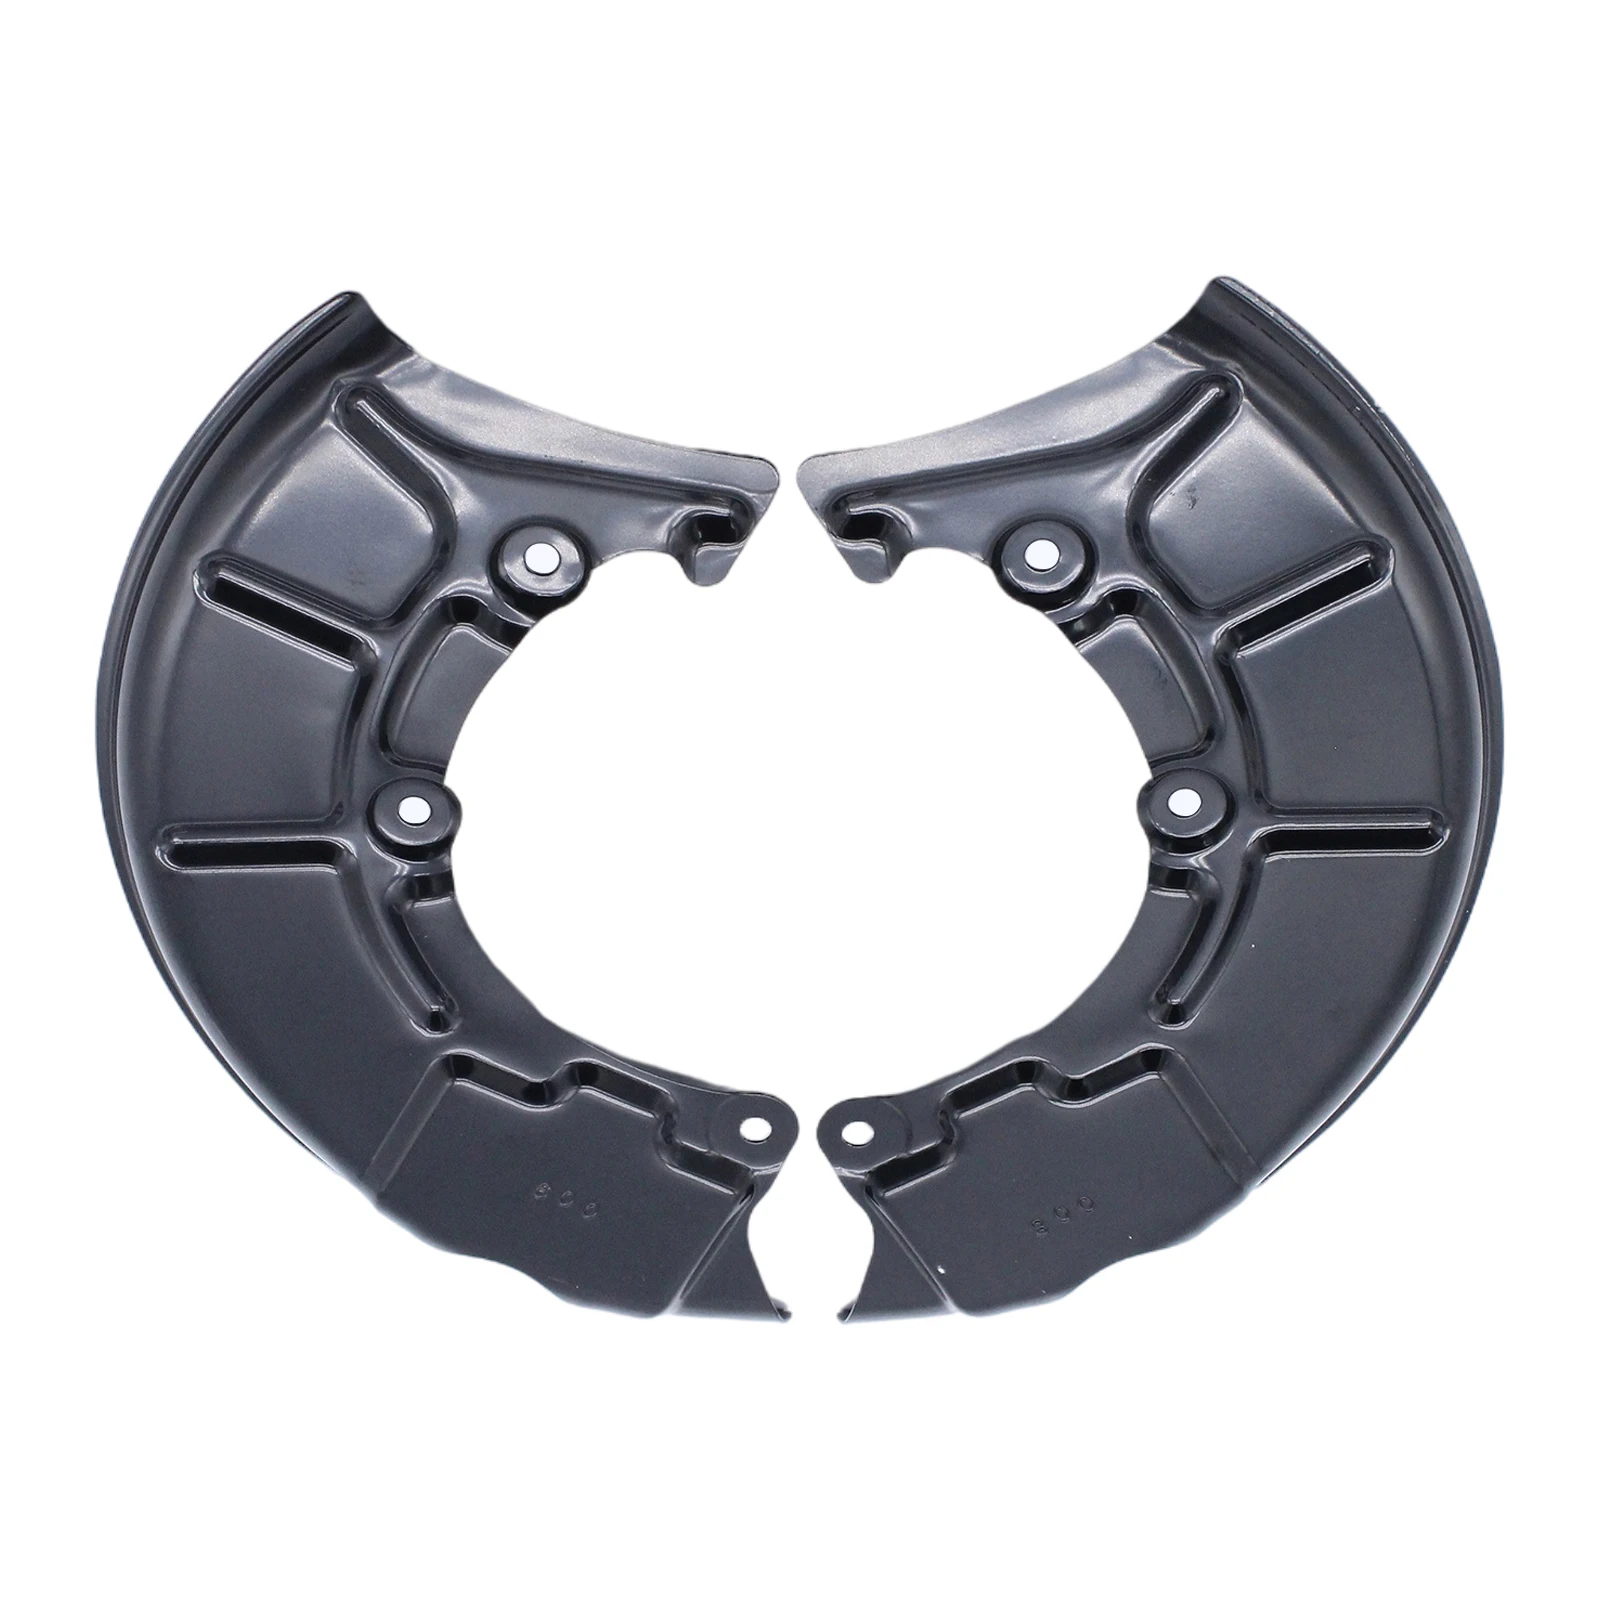 2 Pieces Front Disc Brake Cover Dust Shield Splash Plate for Golf 2000-2004 1J0615312A Replacement Acc